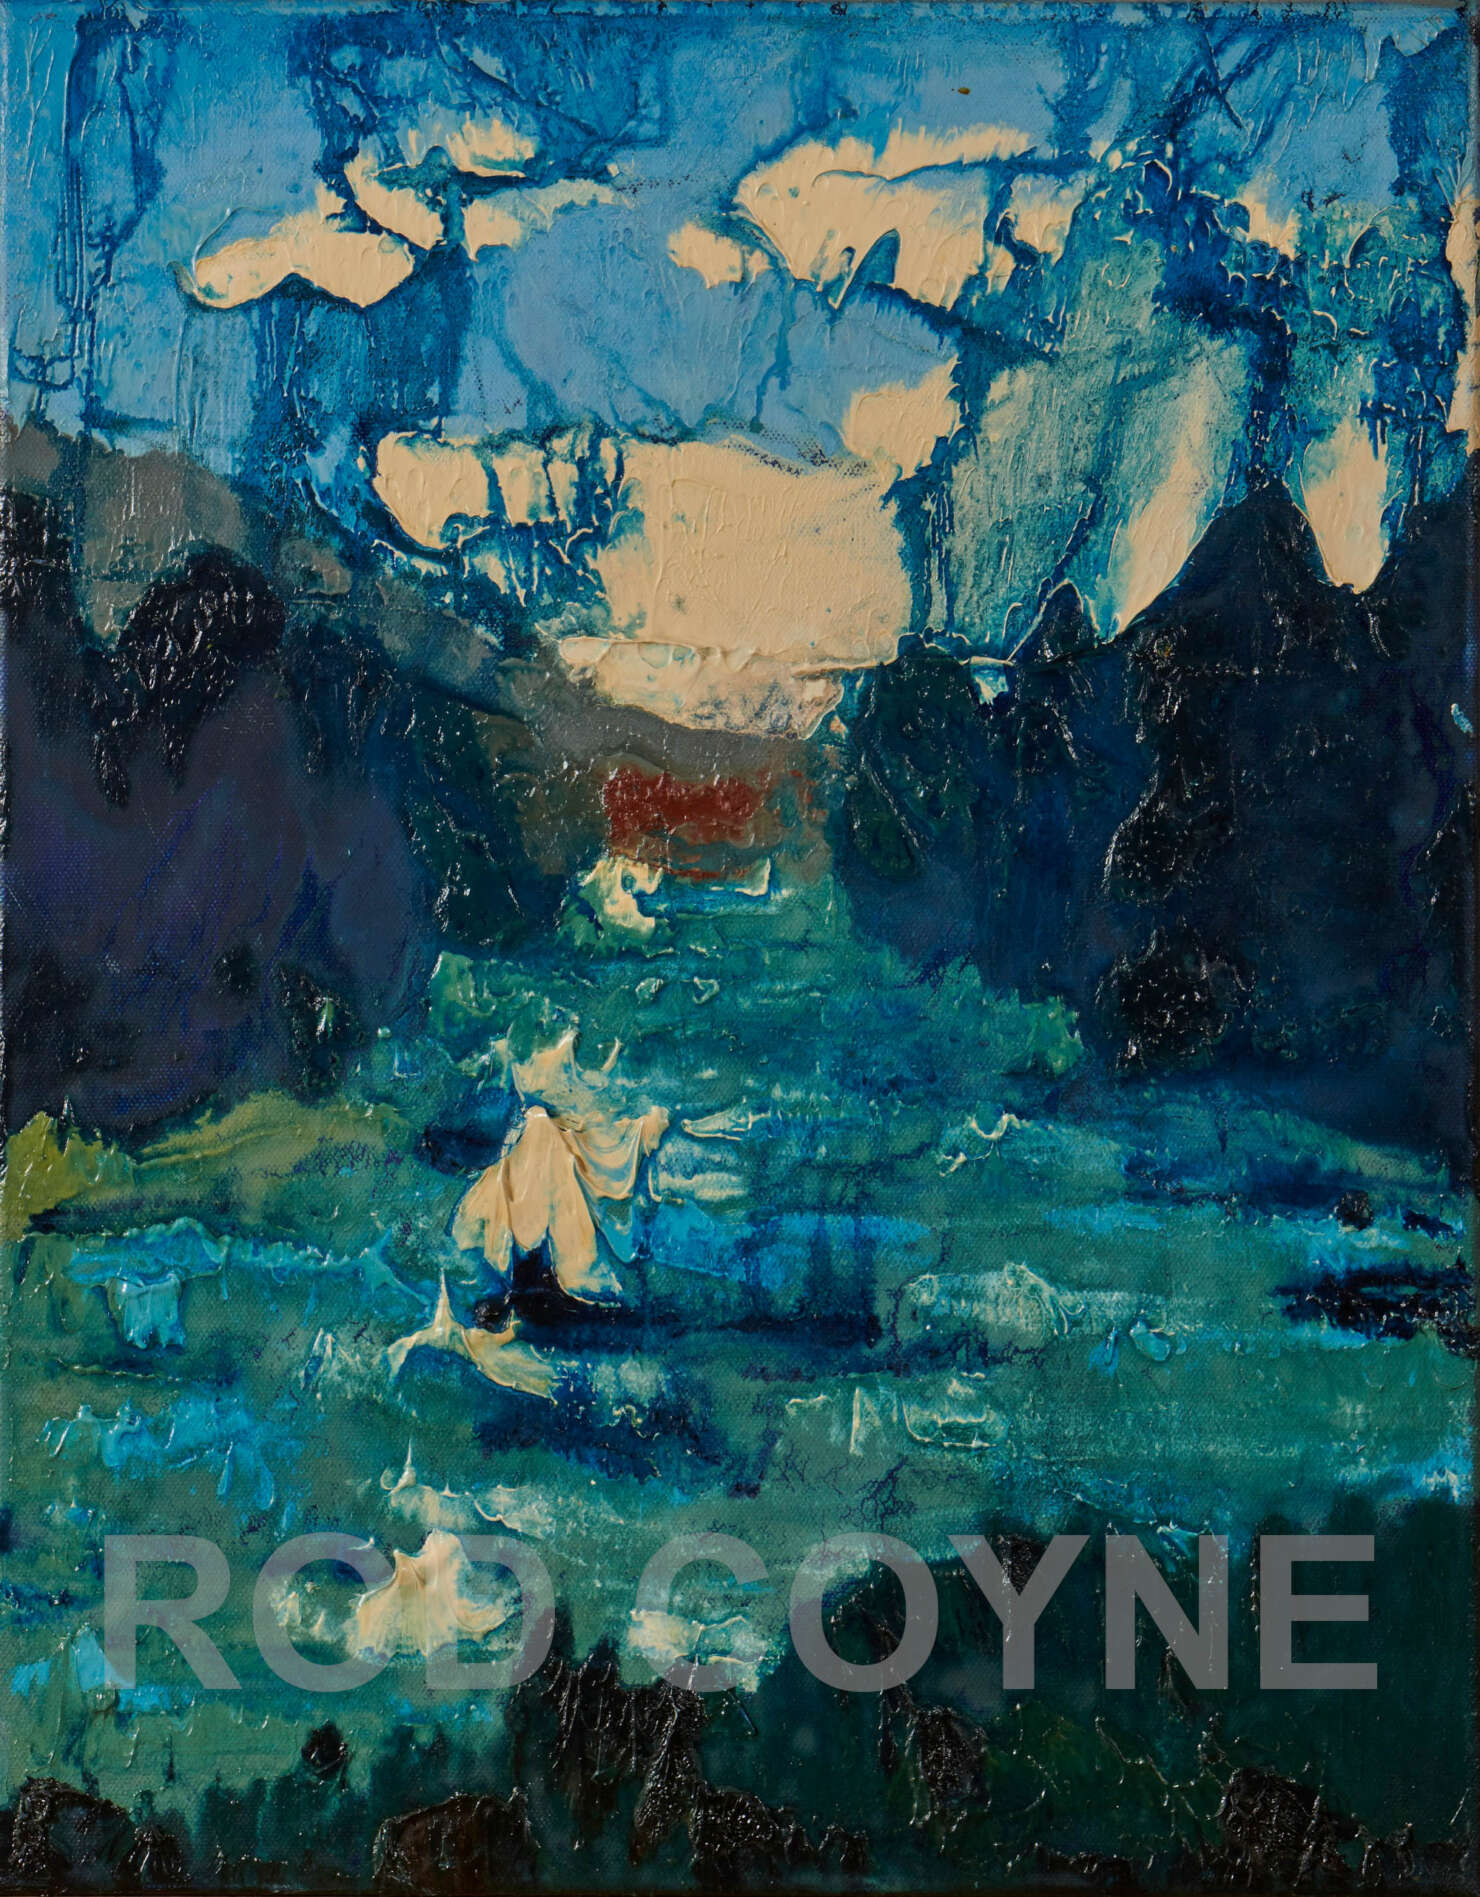 artist rod coyne's landscape painting "The Meetings" is shown here, watermarked.